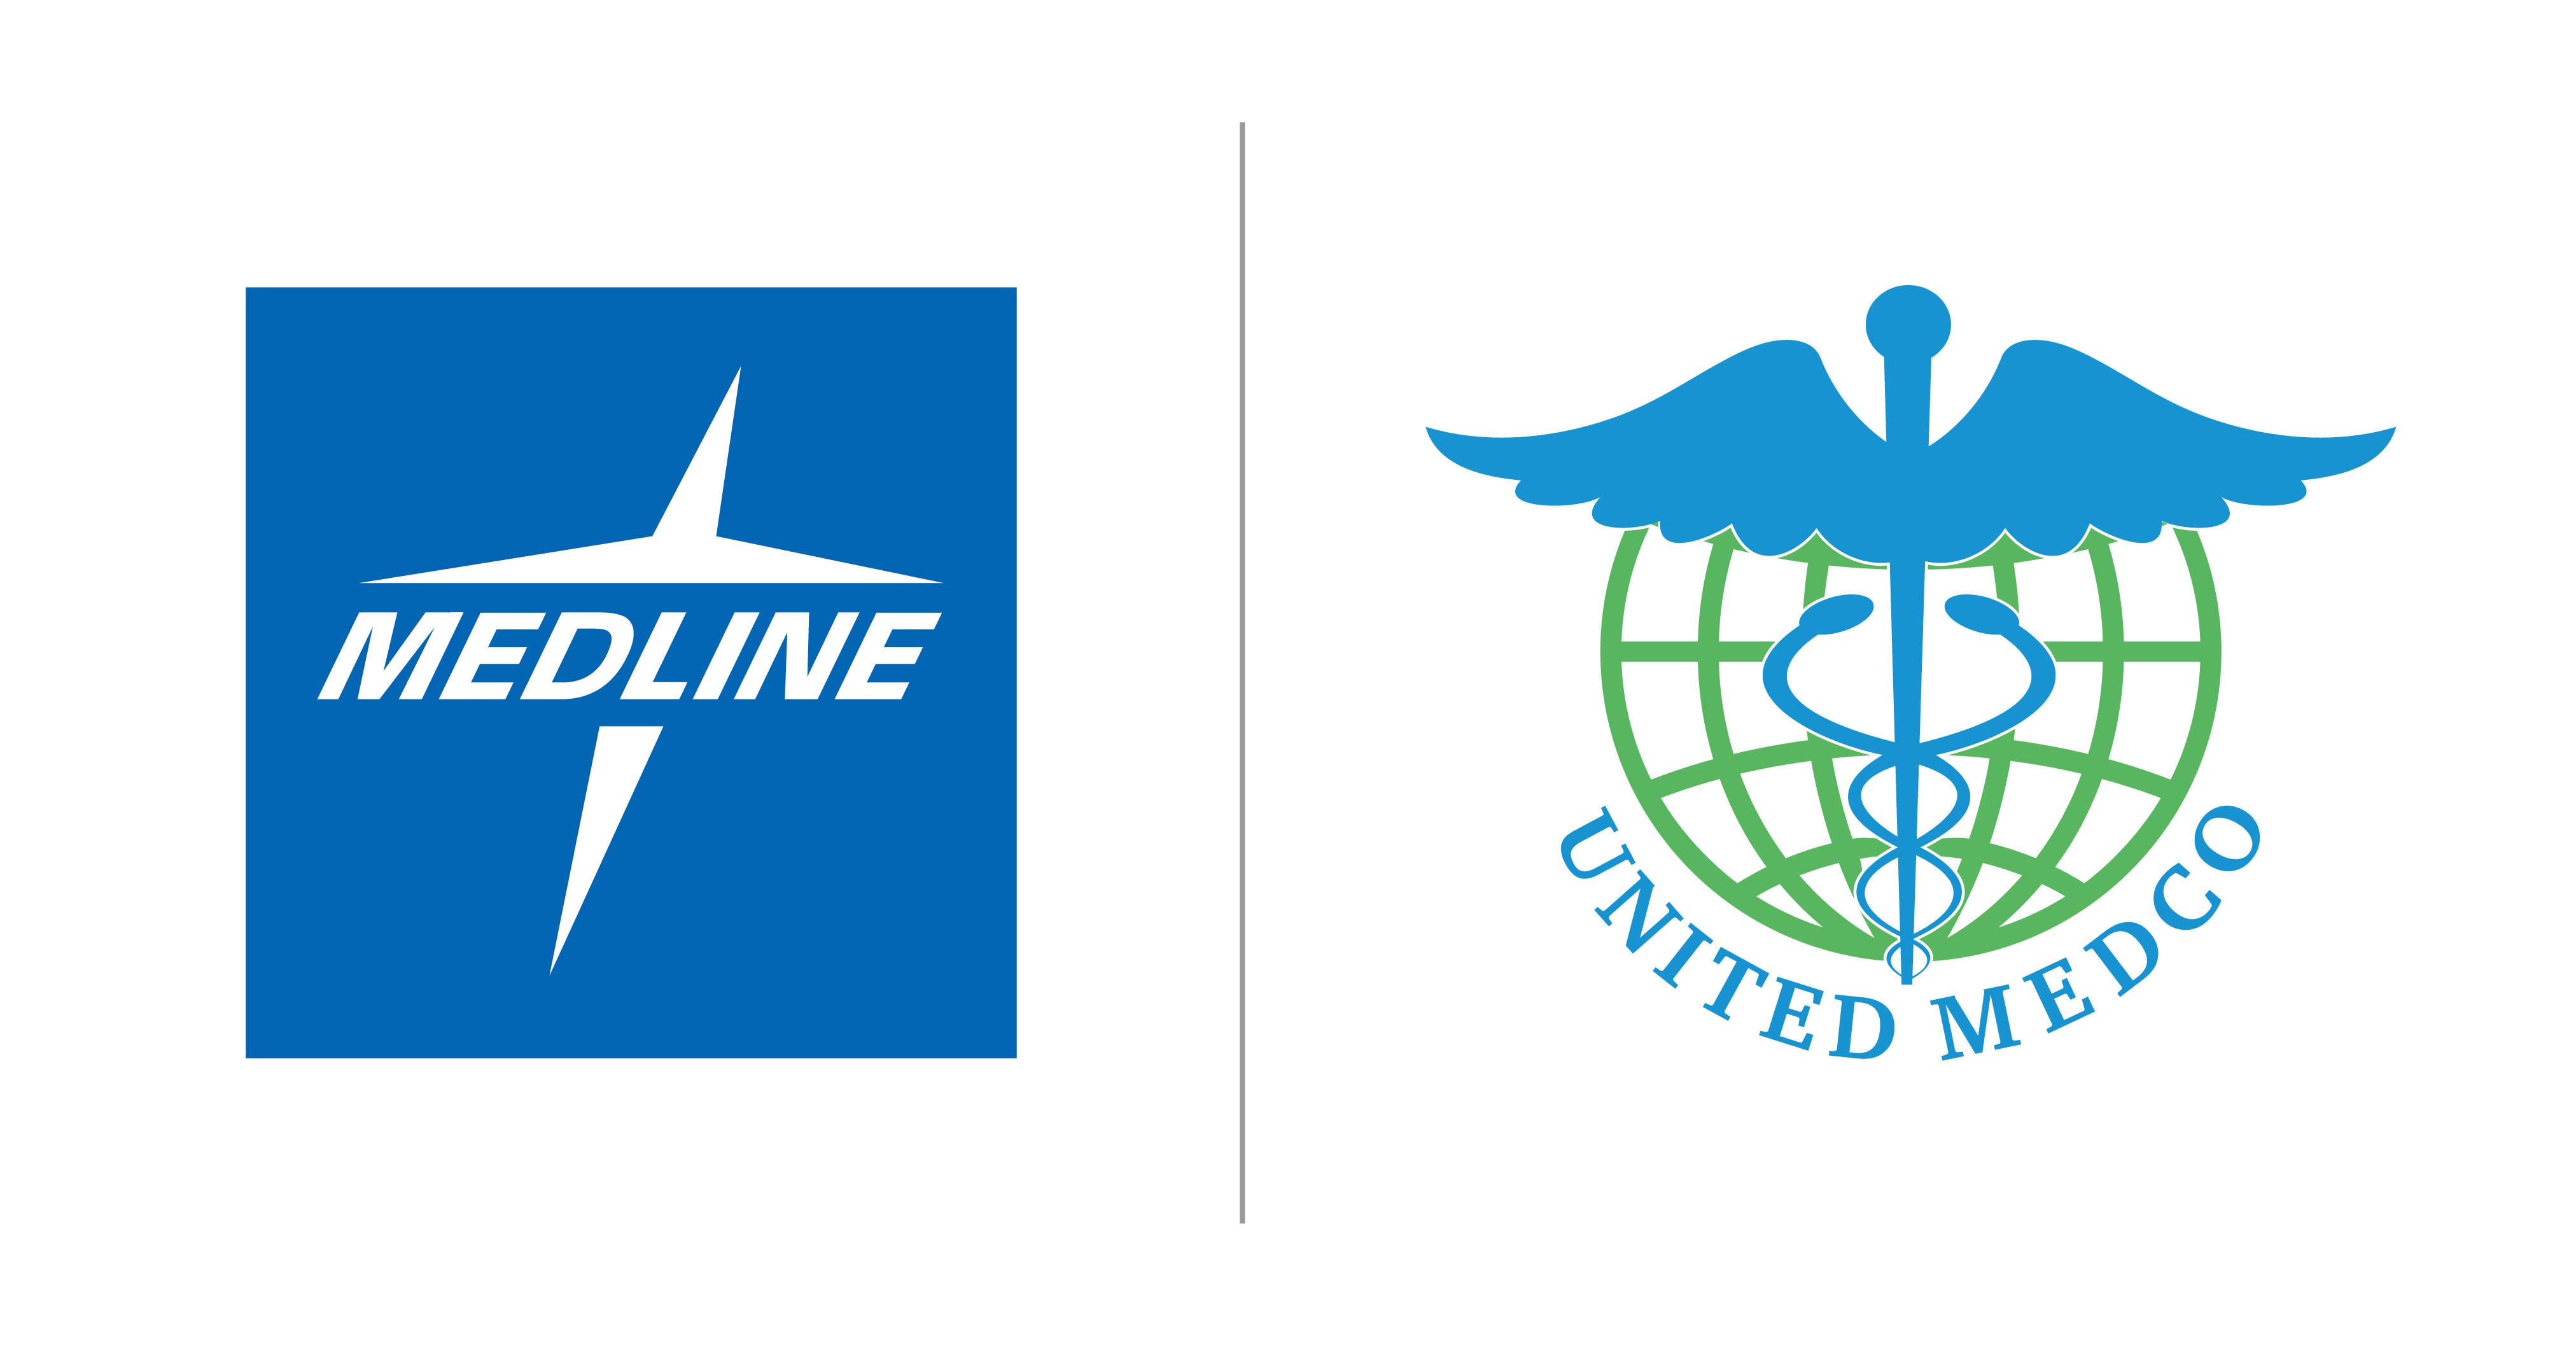 Medline and United Medco